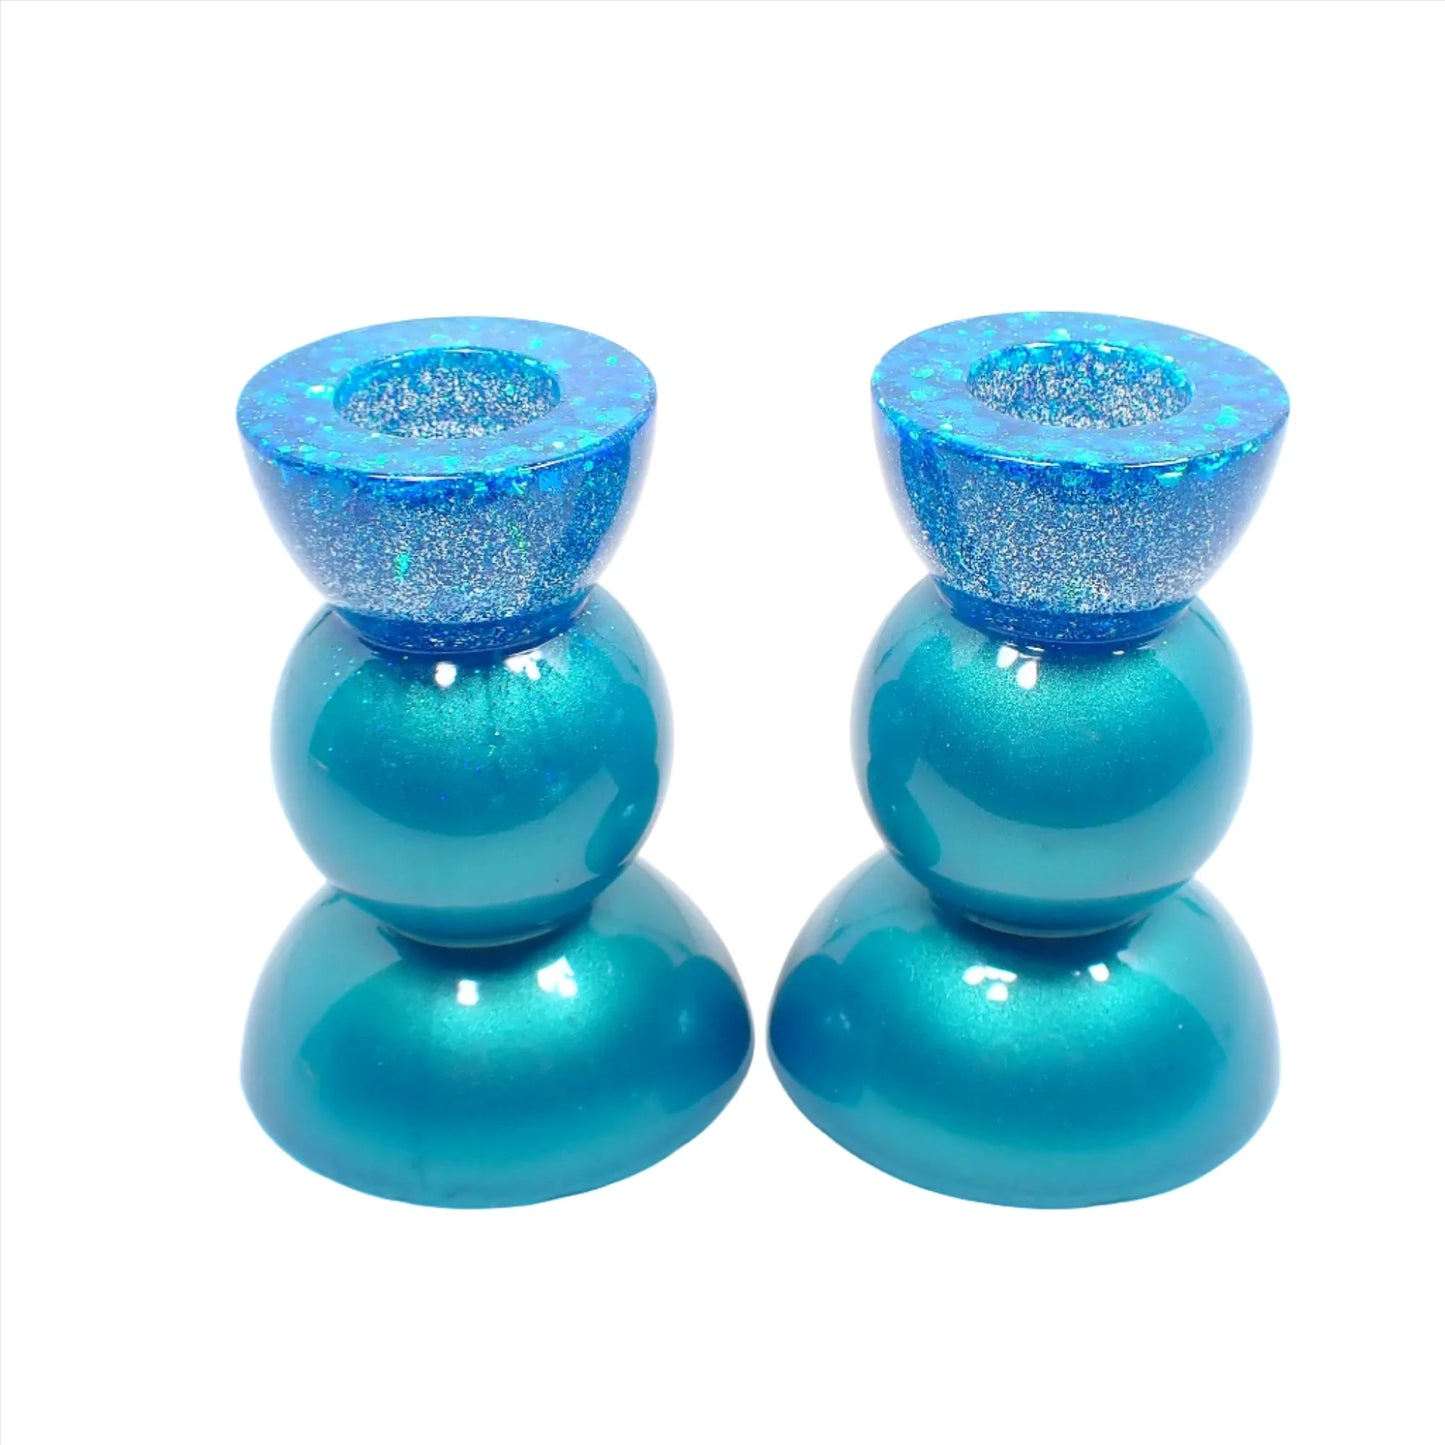 Side view of the handmade resin rounded geometric candlestick holders. They are pearly aqua blue in color with chunky iridescent glitter at the top. They are shaped with a semi circle at the top and bottom with a sphere shape in between. 